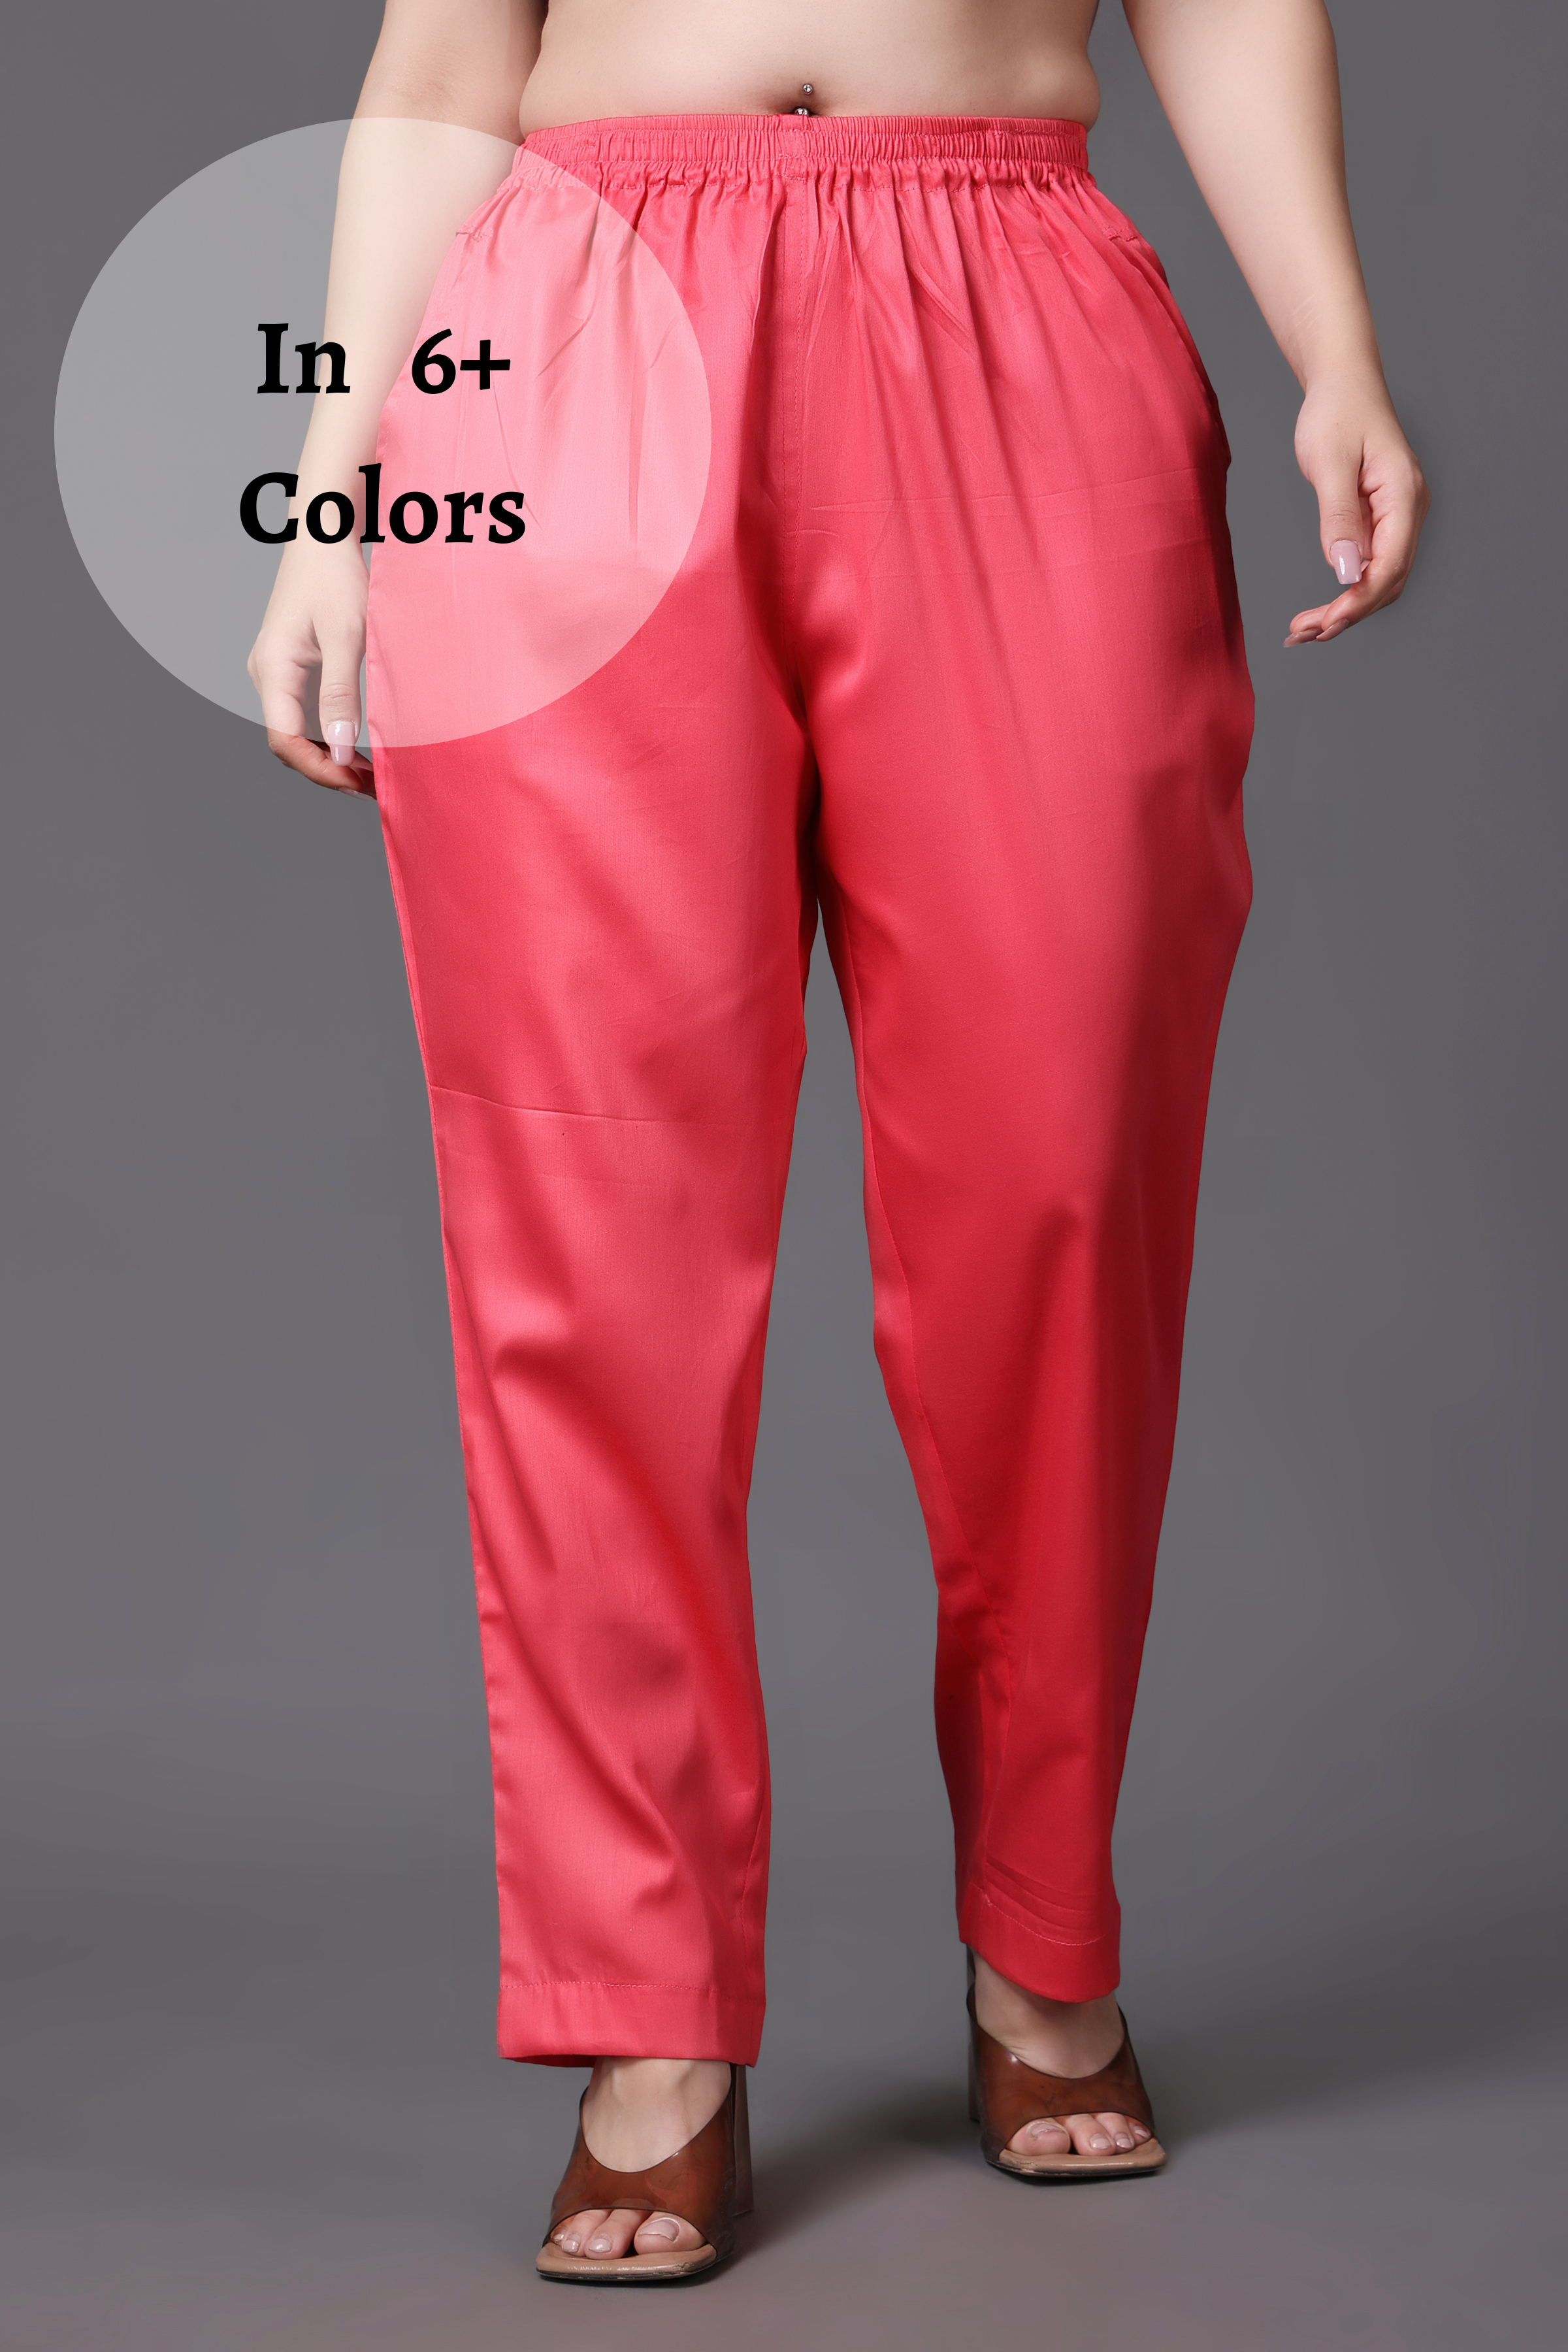 Buy Yellow Black Palazzo Pant Rayon for Best Price, Reviews, Free Shipping